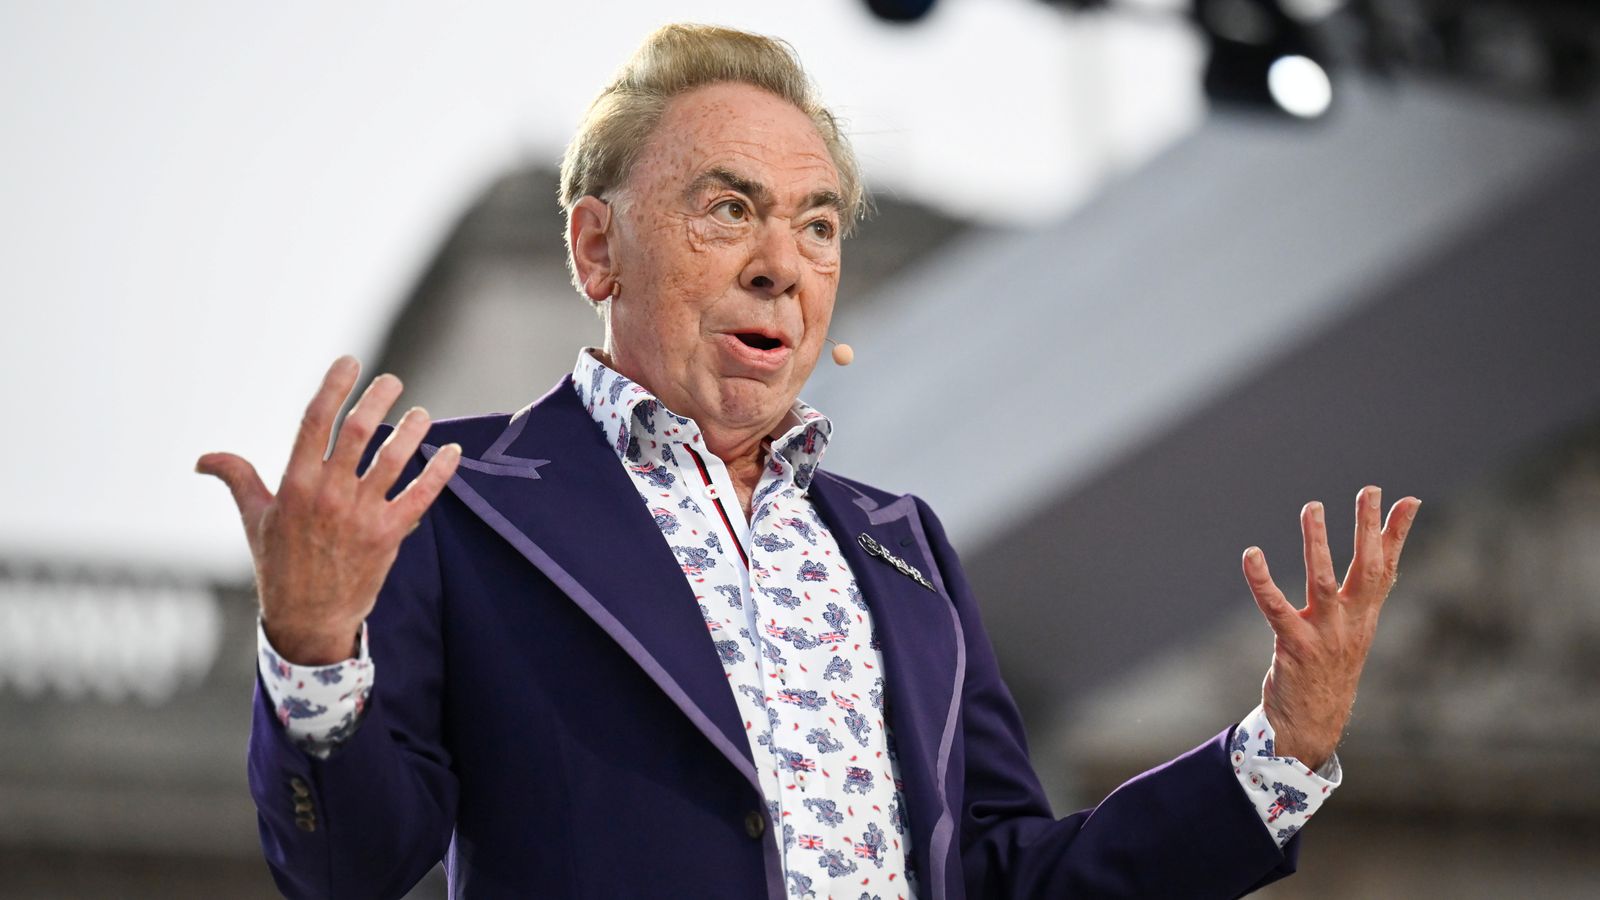 Andrew Lloyd Webber asked priest to help remove poltergeist from his London home